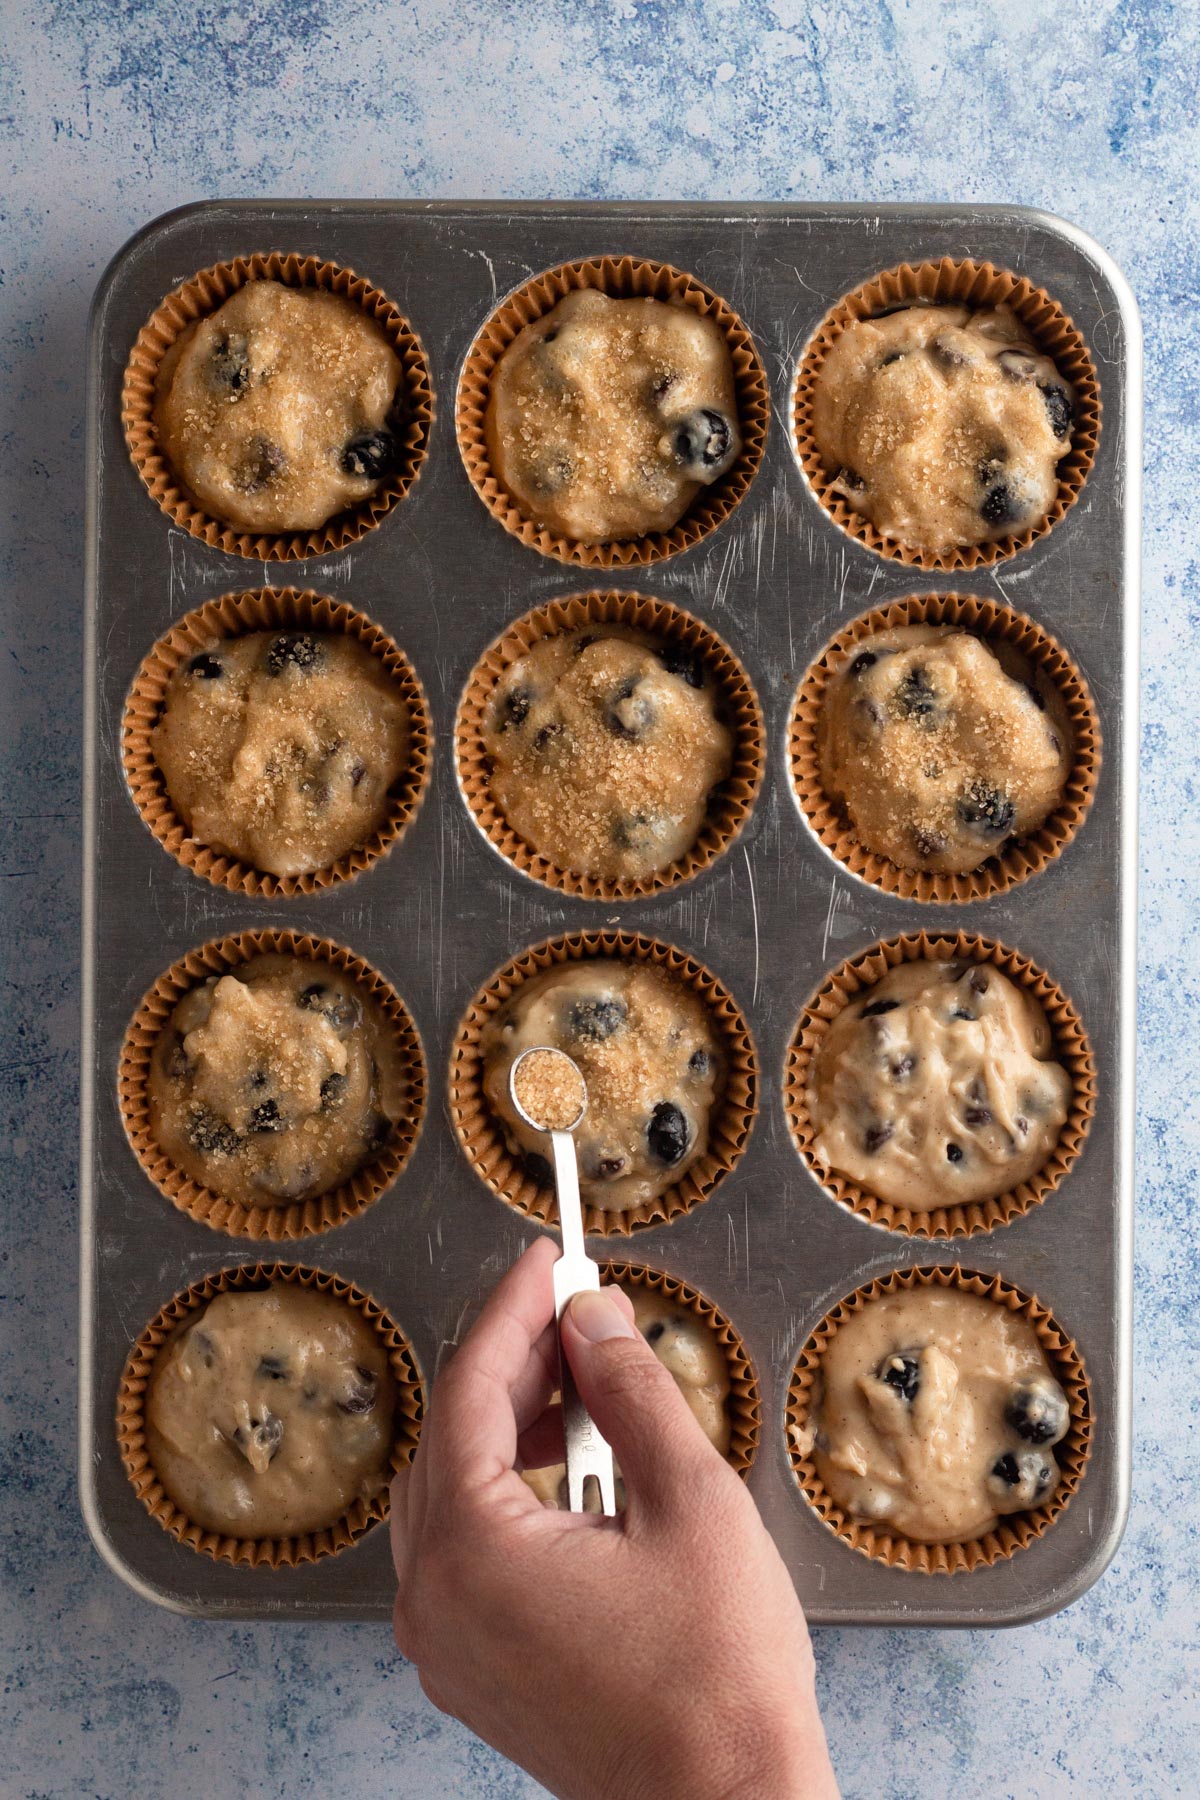 Hand holding a small measuring spoon and sprinkling sugar over muffin batter in pan.